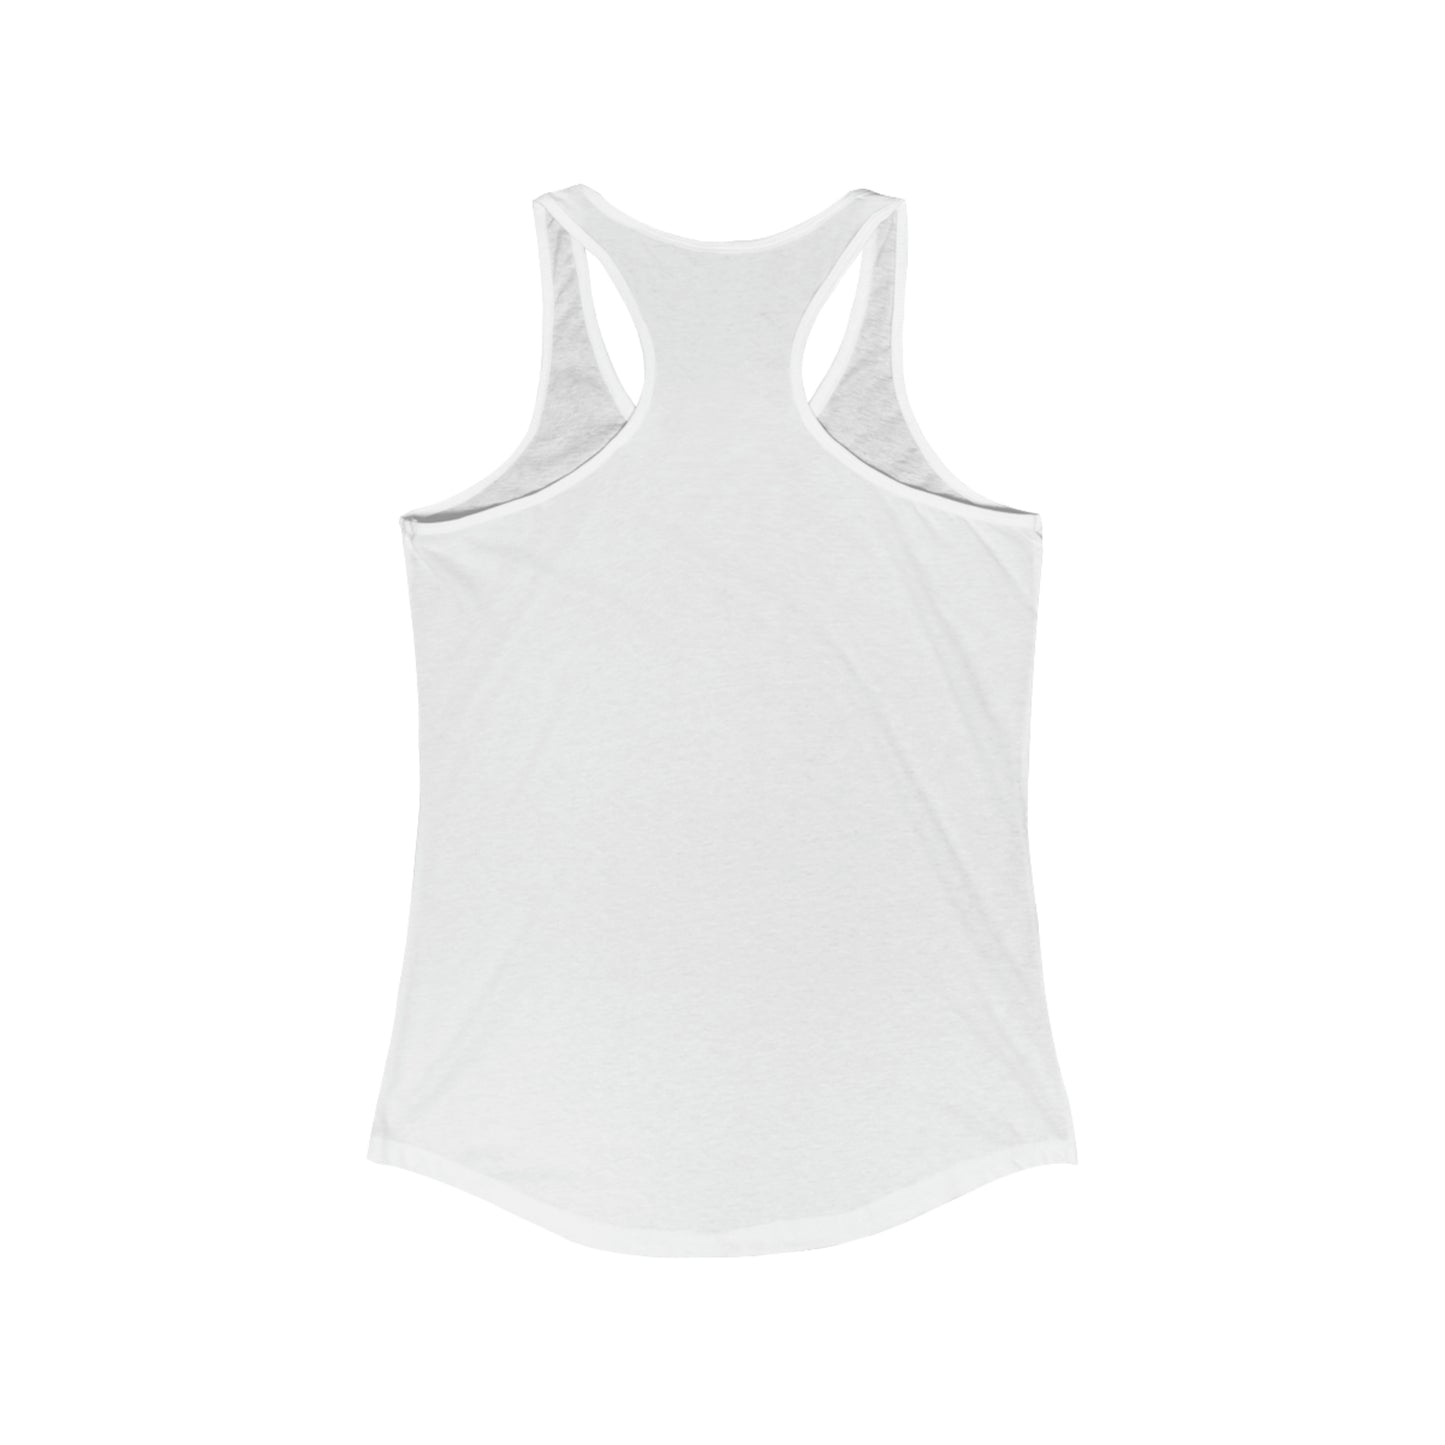 Whining Specialist  Women's Ideal Racerback Tank